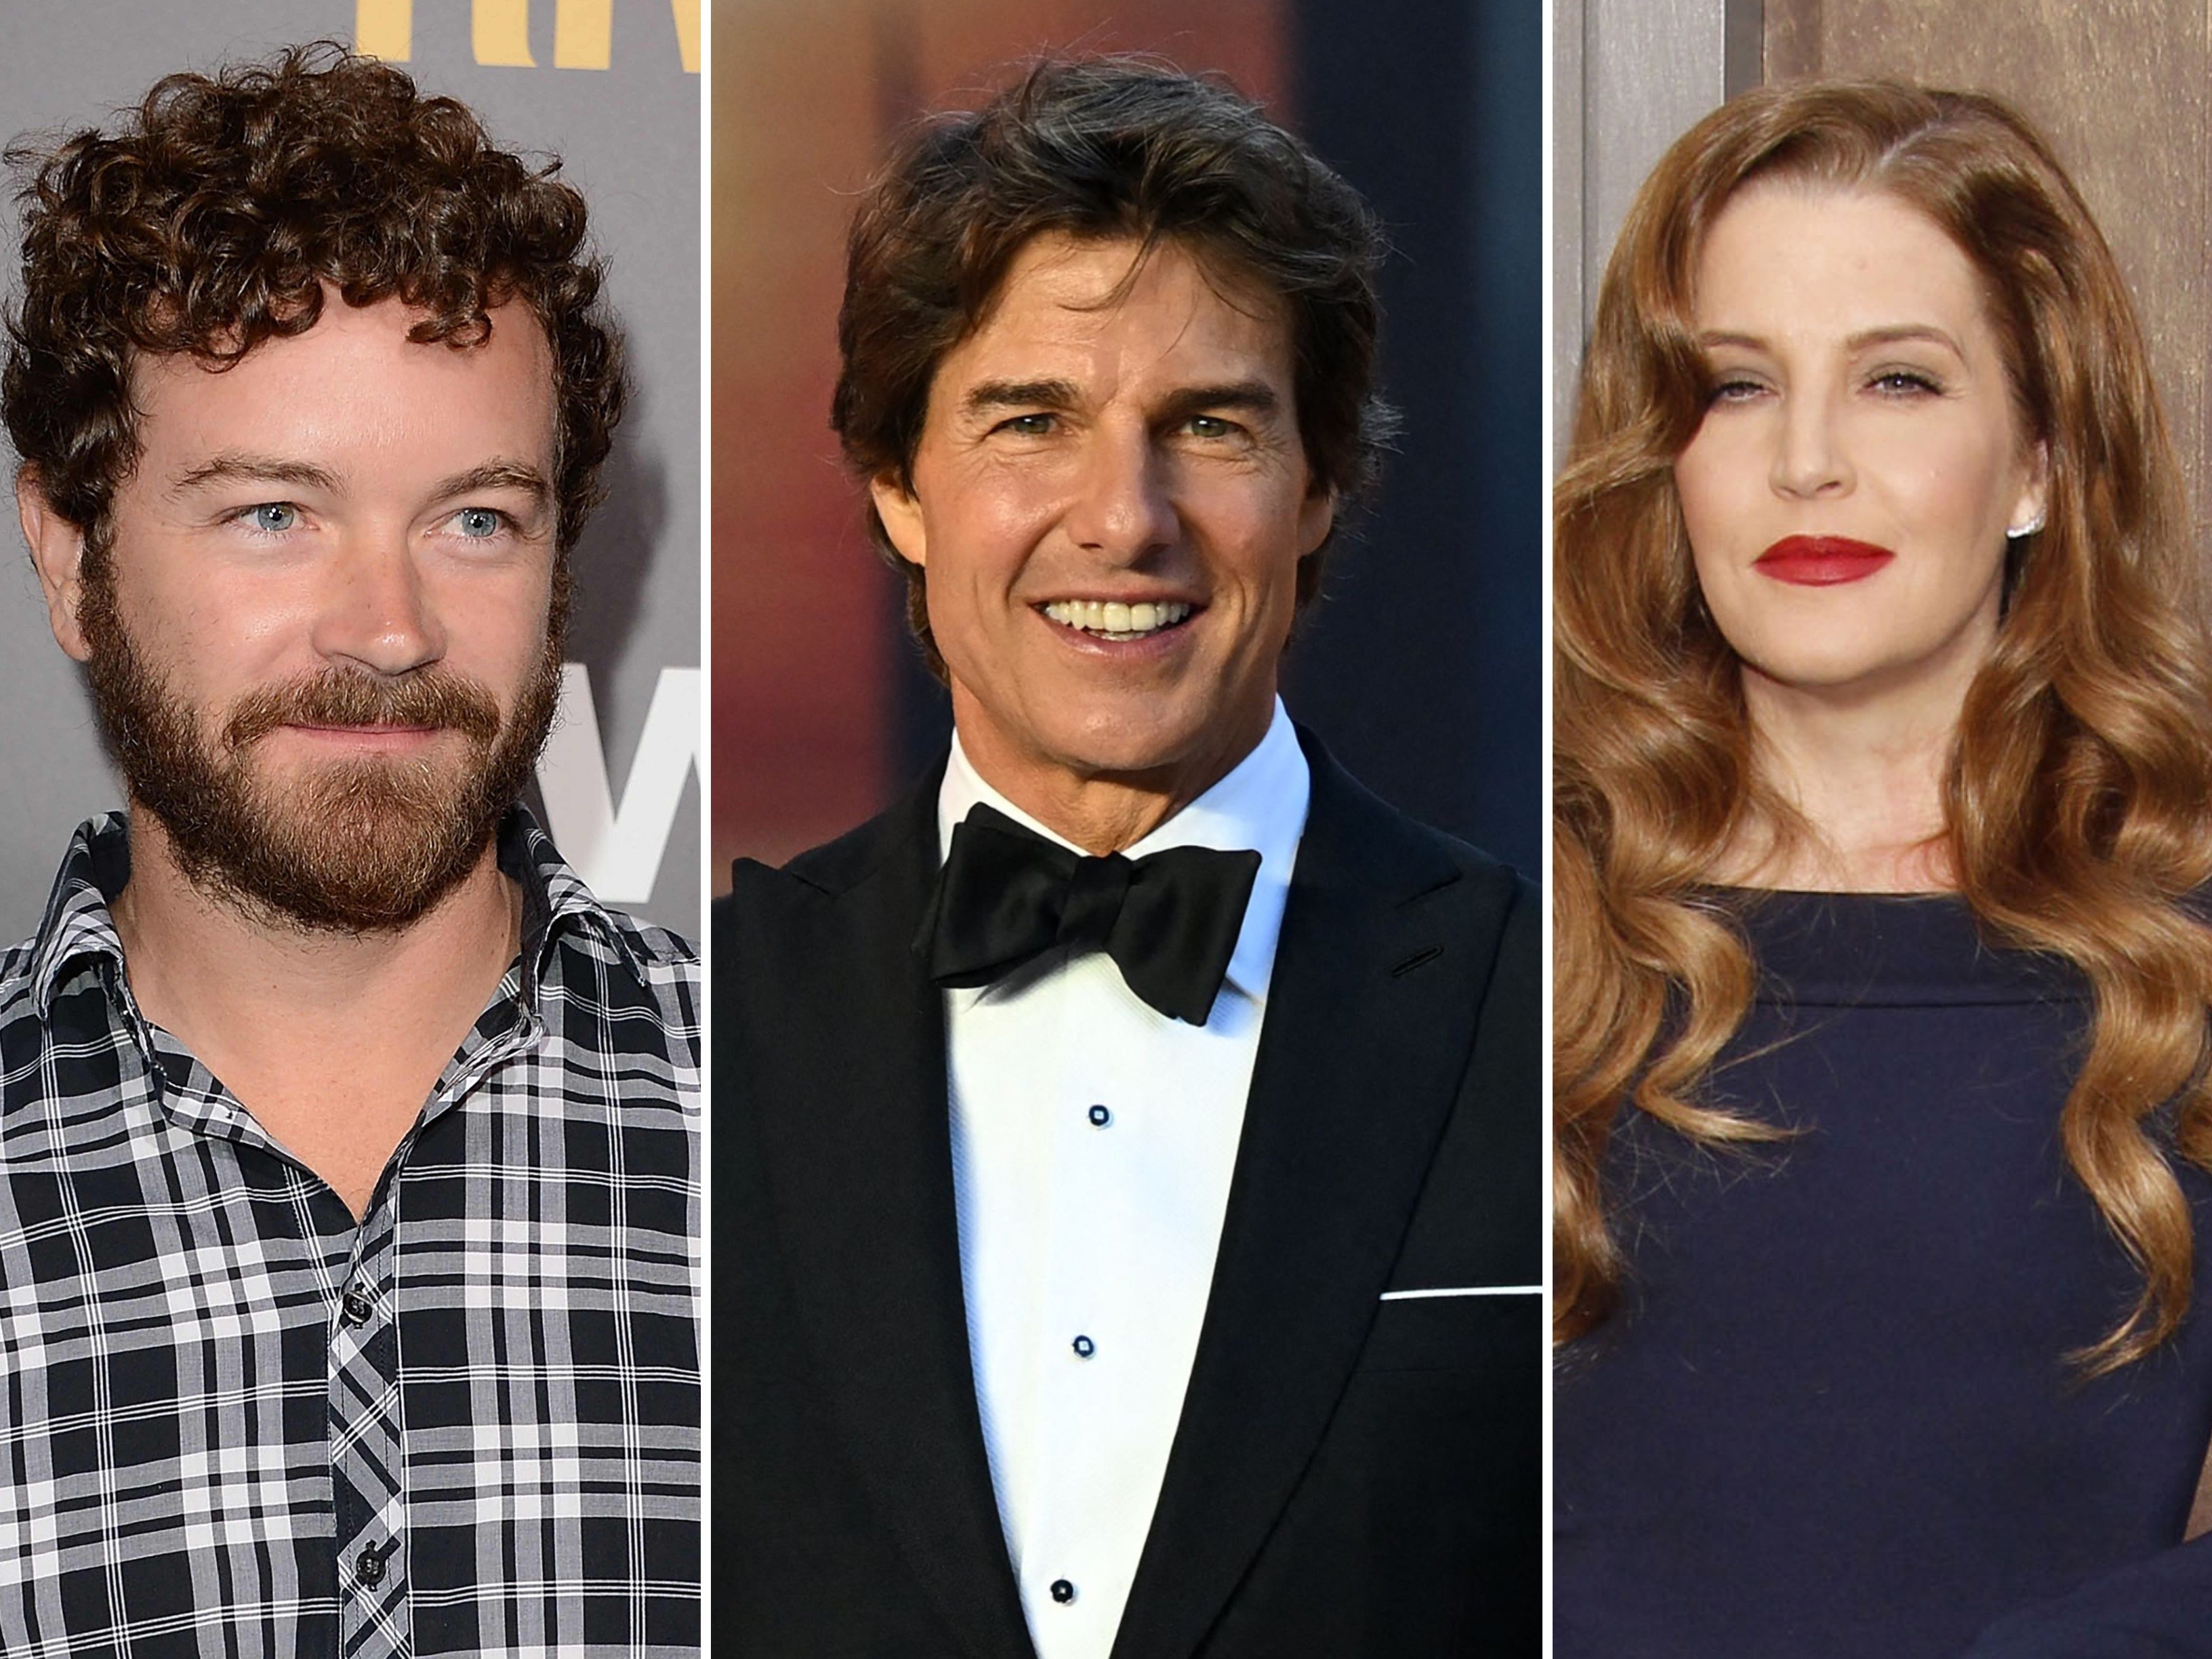 Danny Masterson, Tom Cruise and Lisa Marie Presley were all involved in Scientology. Photos: AFP; EPA